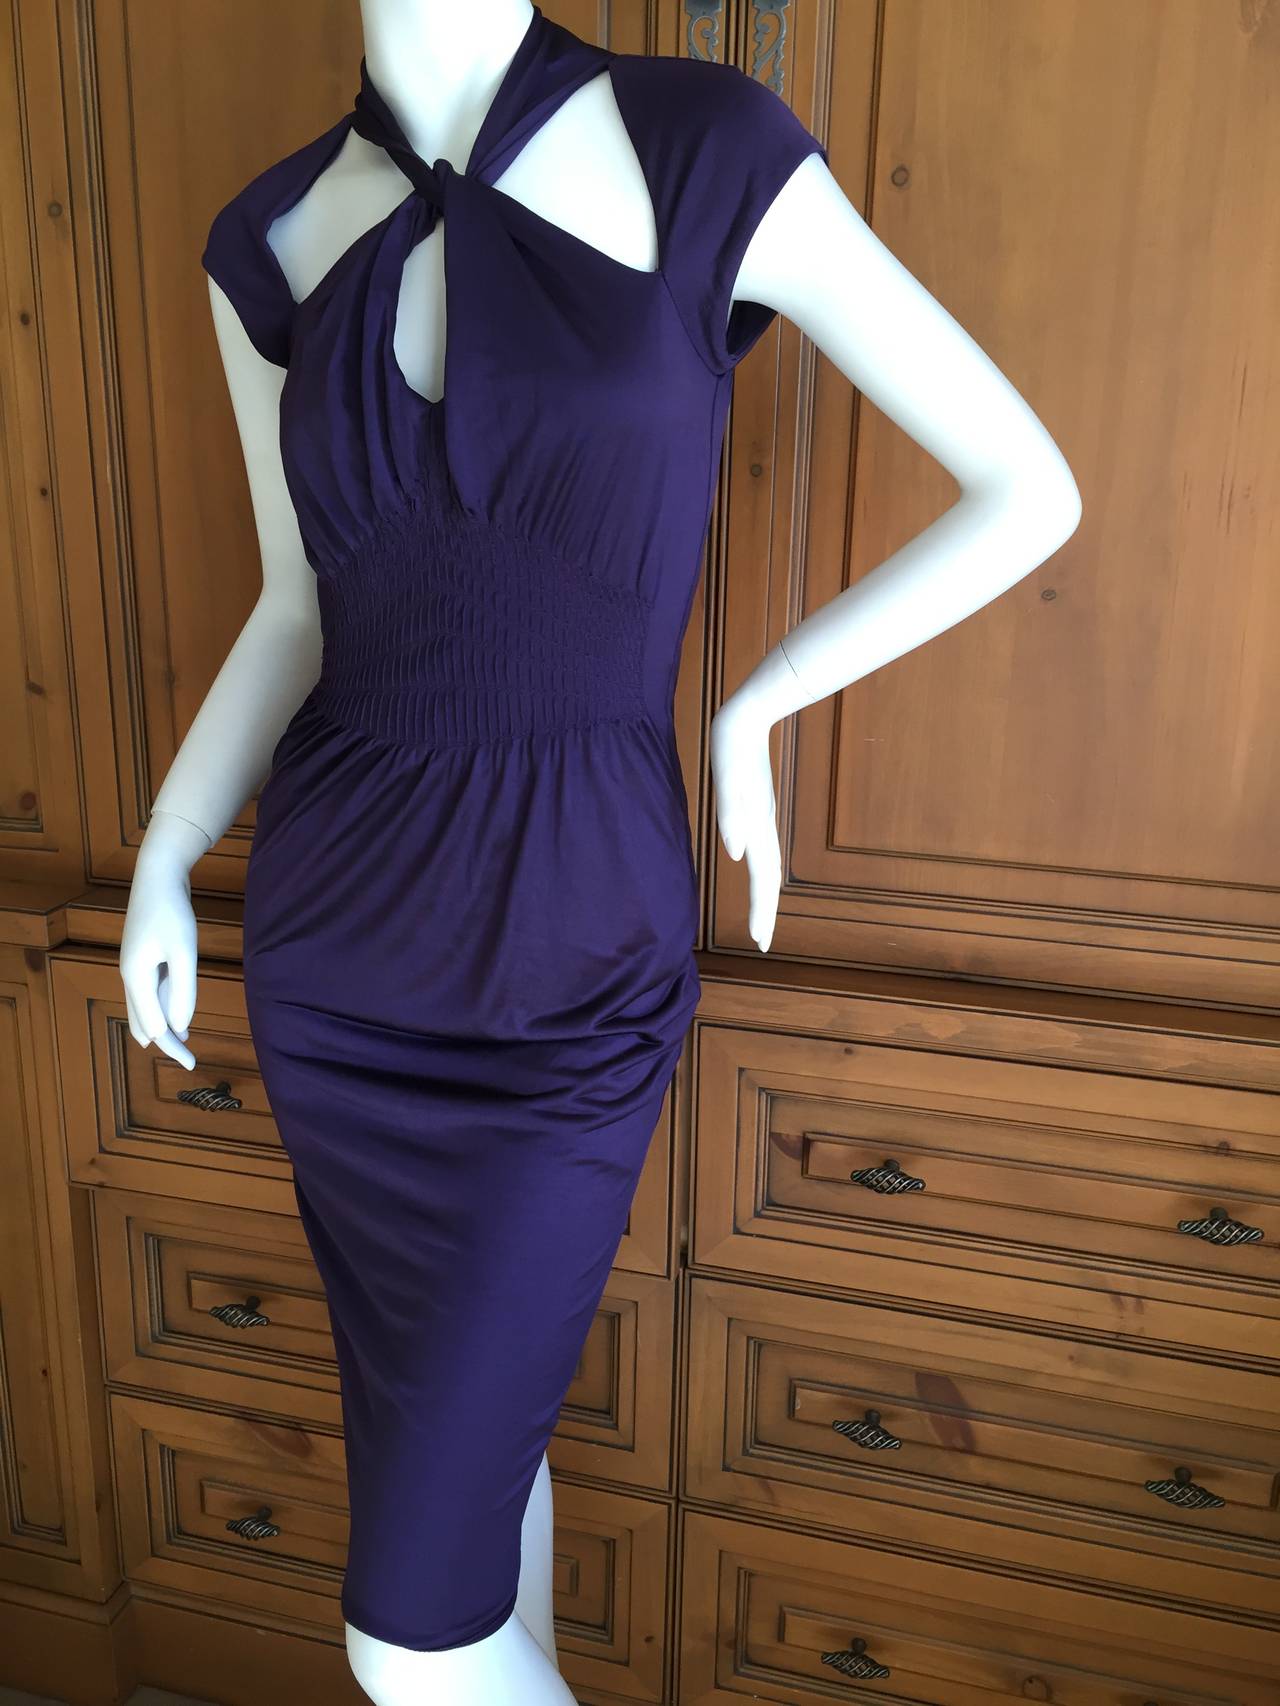 Gucci by Tom Ford Sexy Purple Jersey Backless Dress 
Keyhole halter style top with ruching
This is a fine viscose jersey, with a lot of stretch

Sz Small
Bust 38